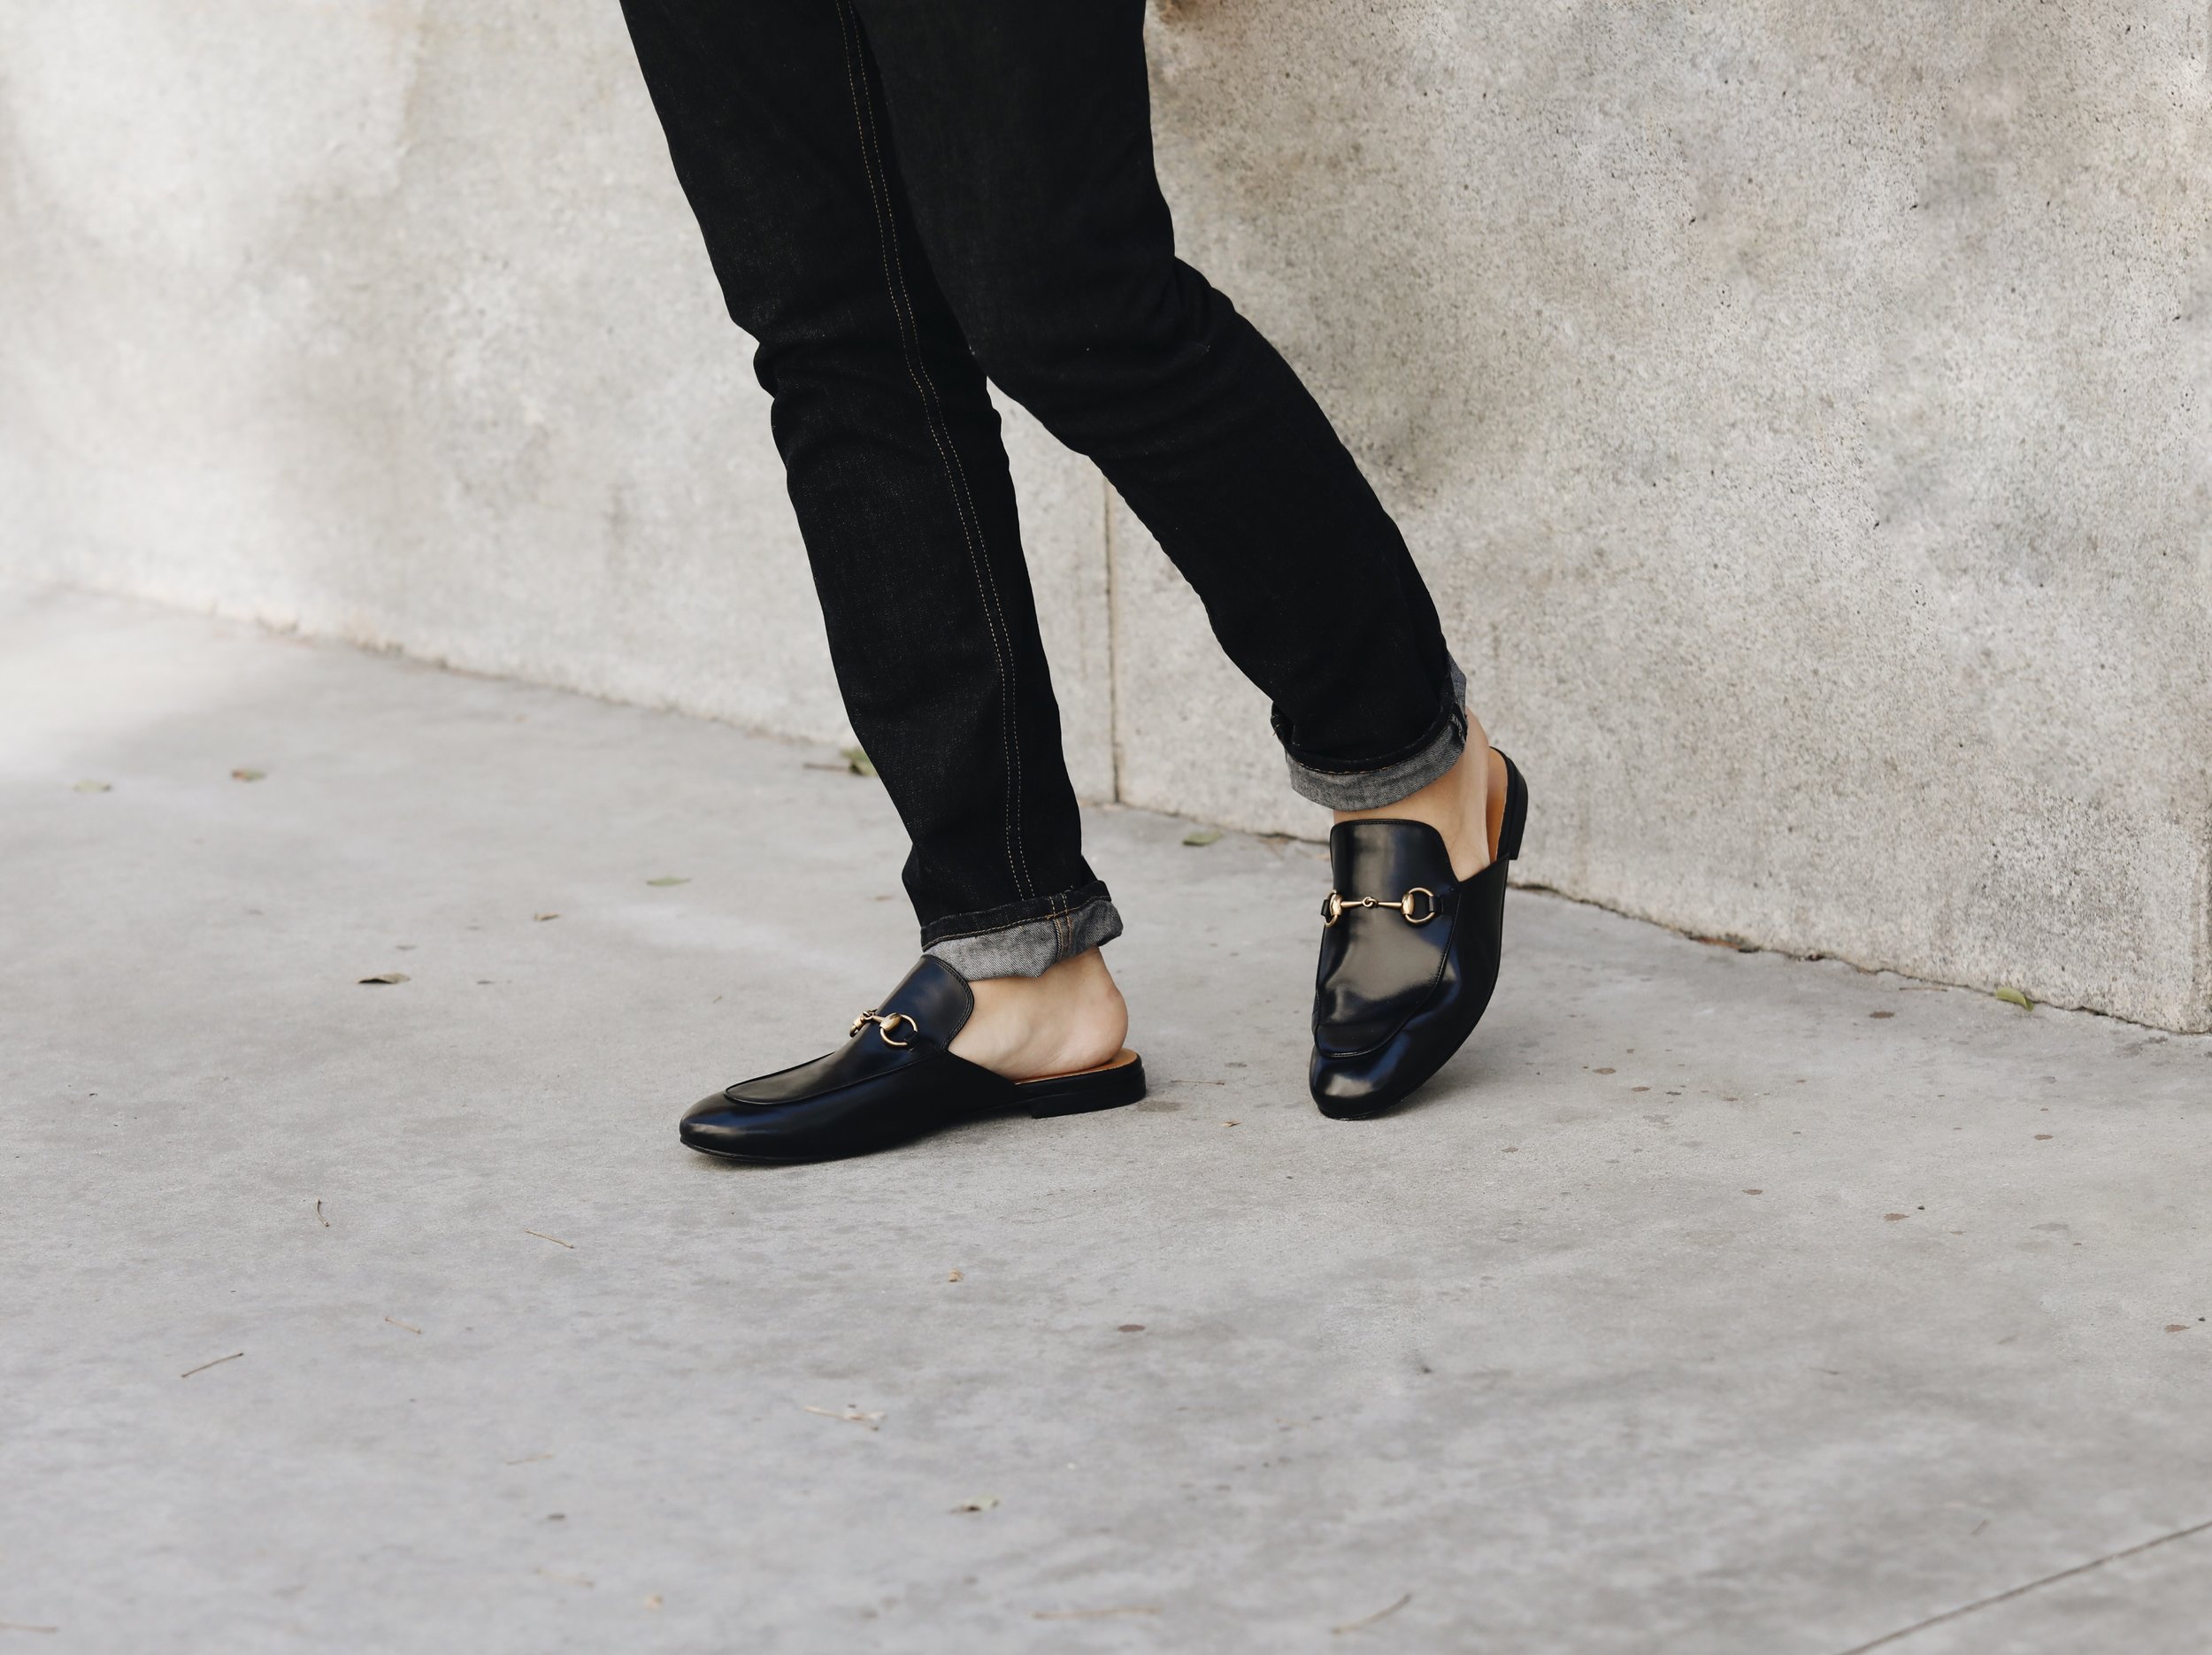 mens backless loafers